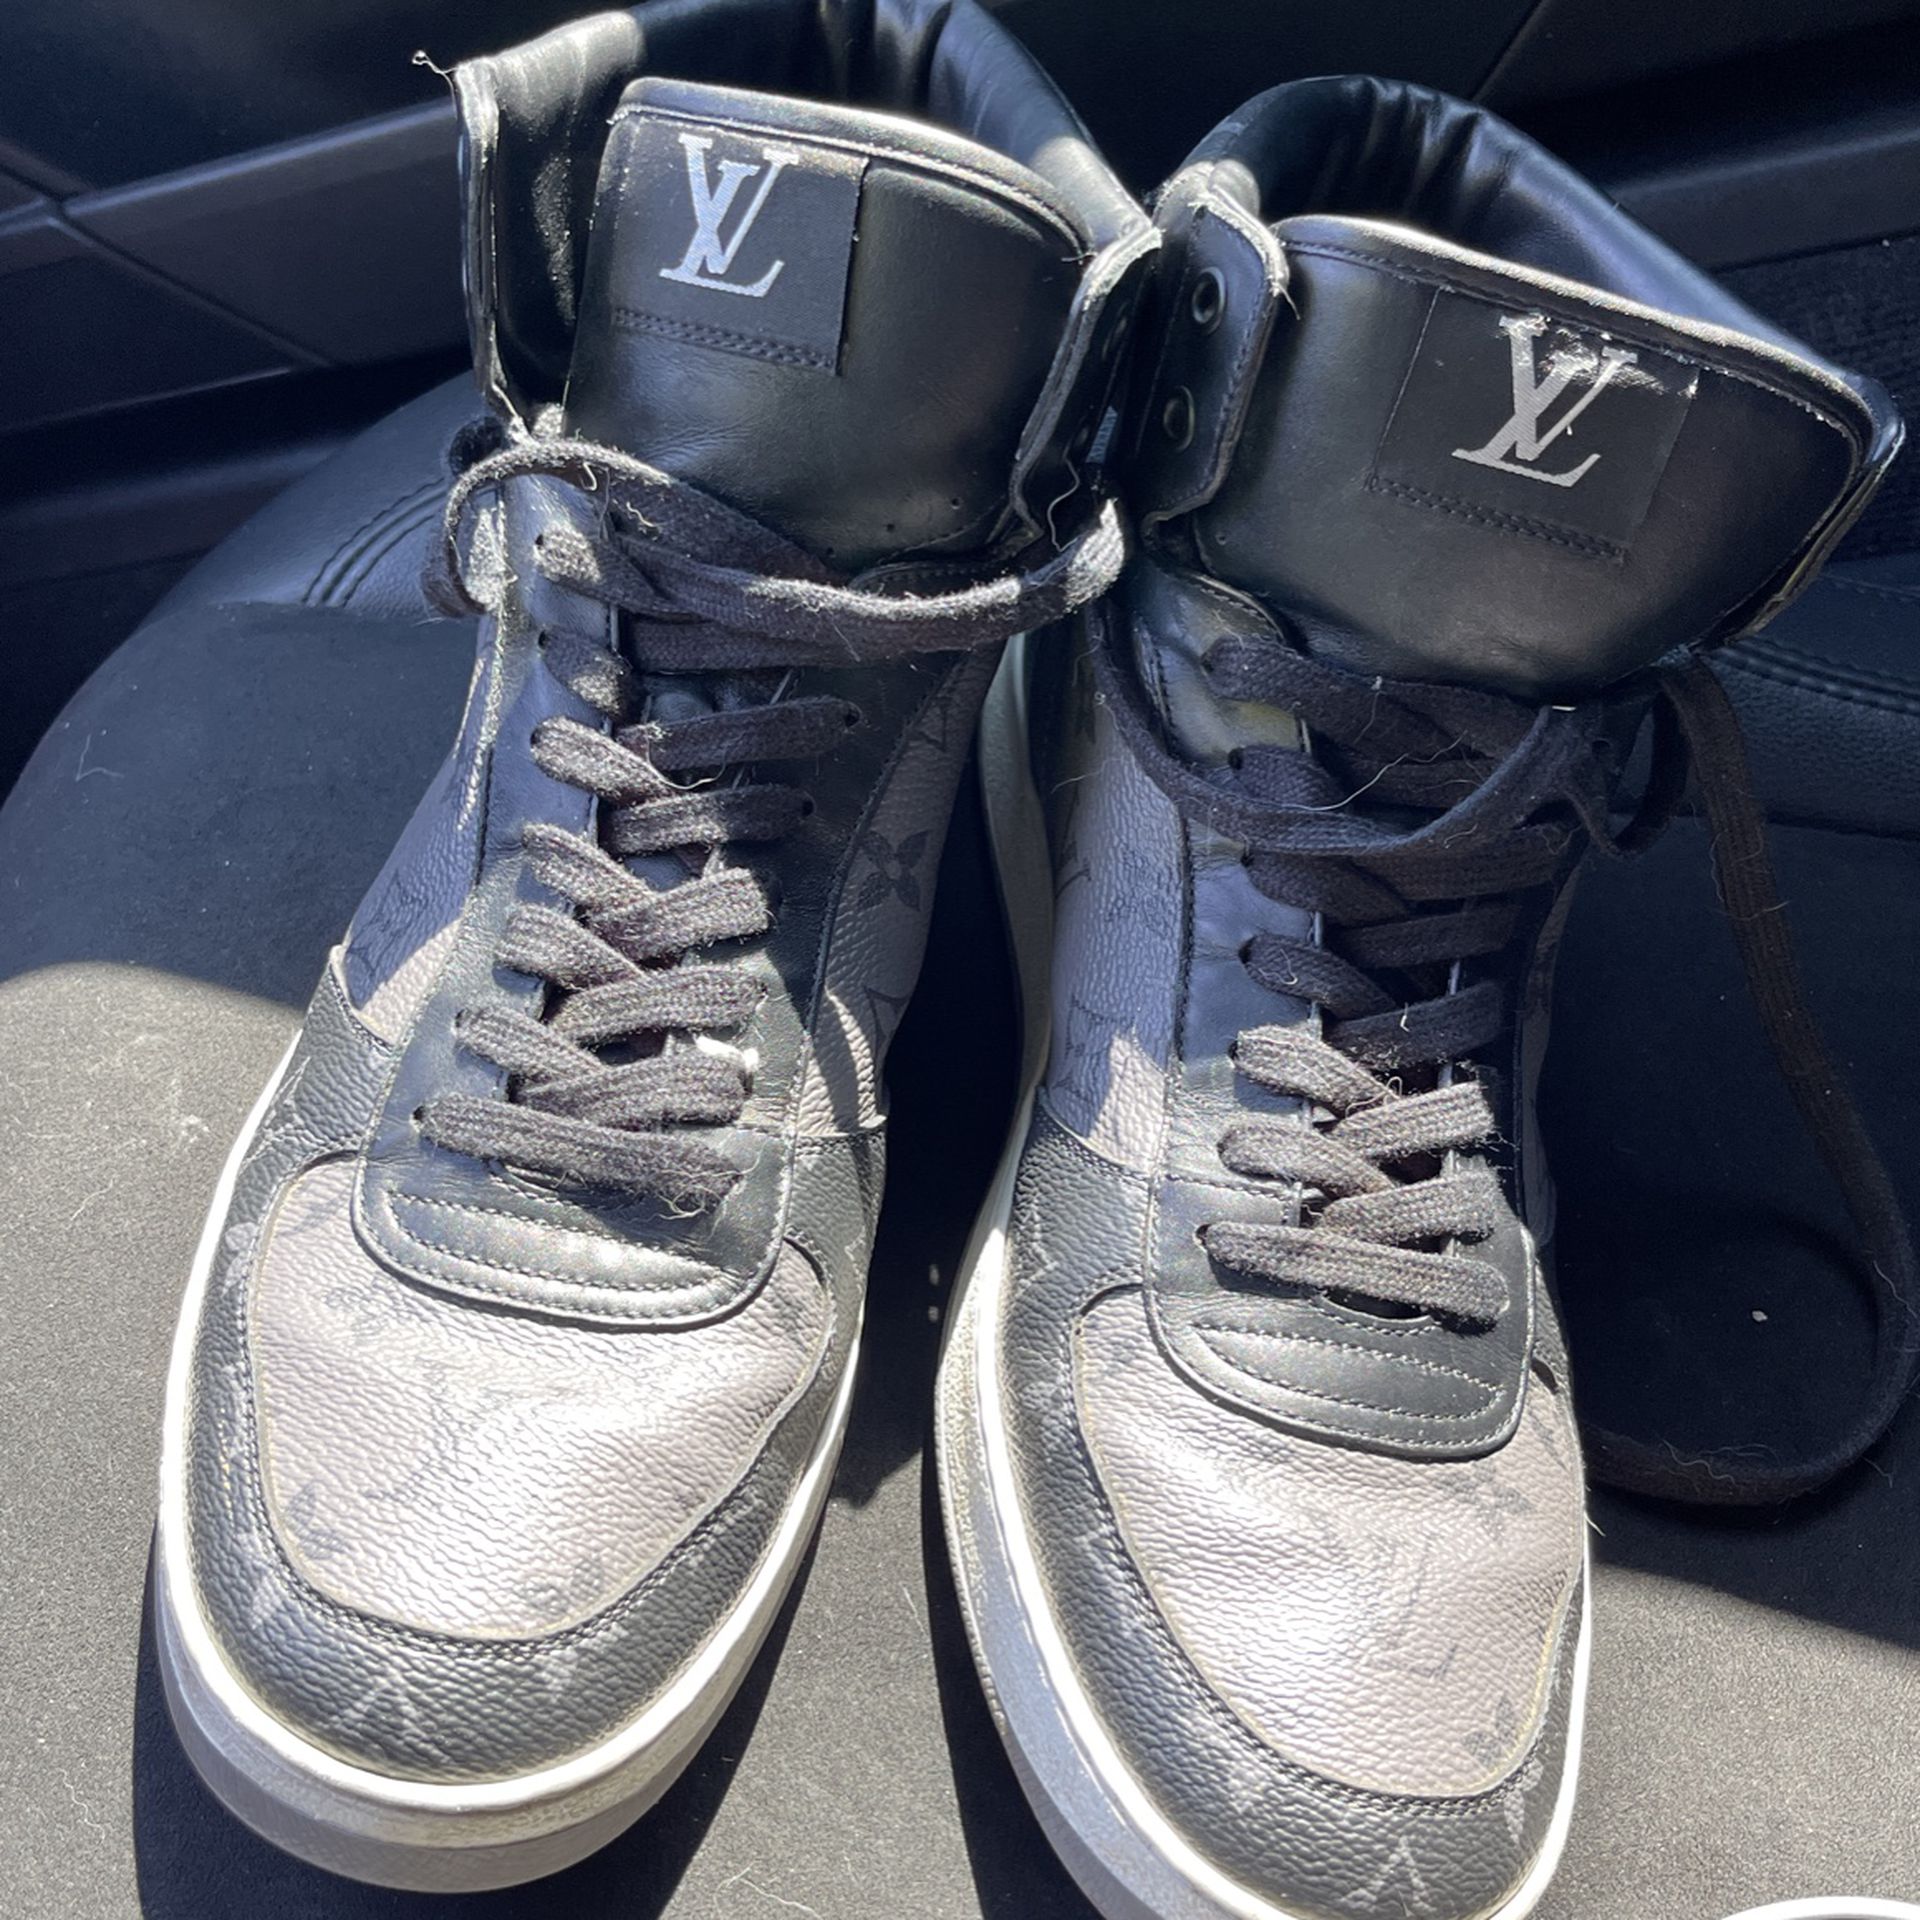 Louis Vuitton Trainer 2 Sneaker for Sale in Bowie, MD - OfferUp